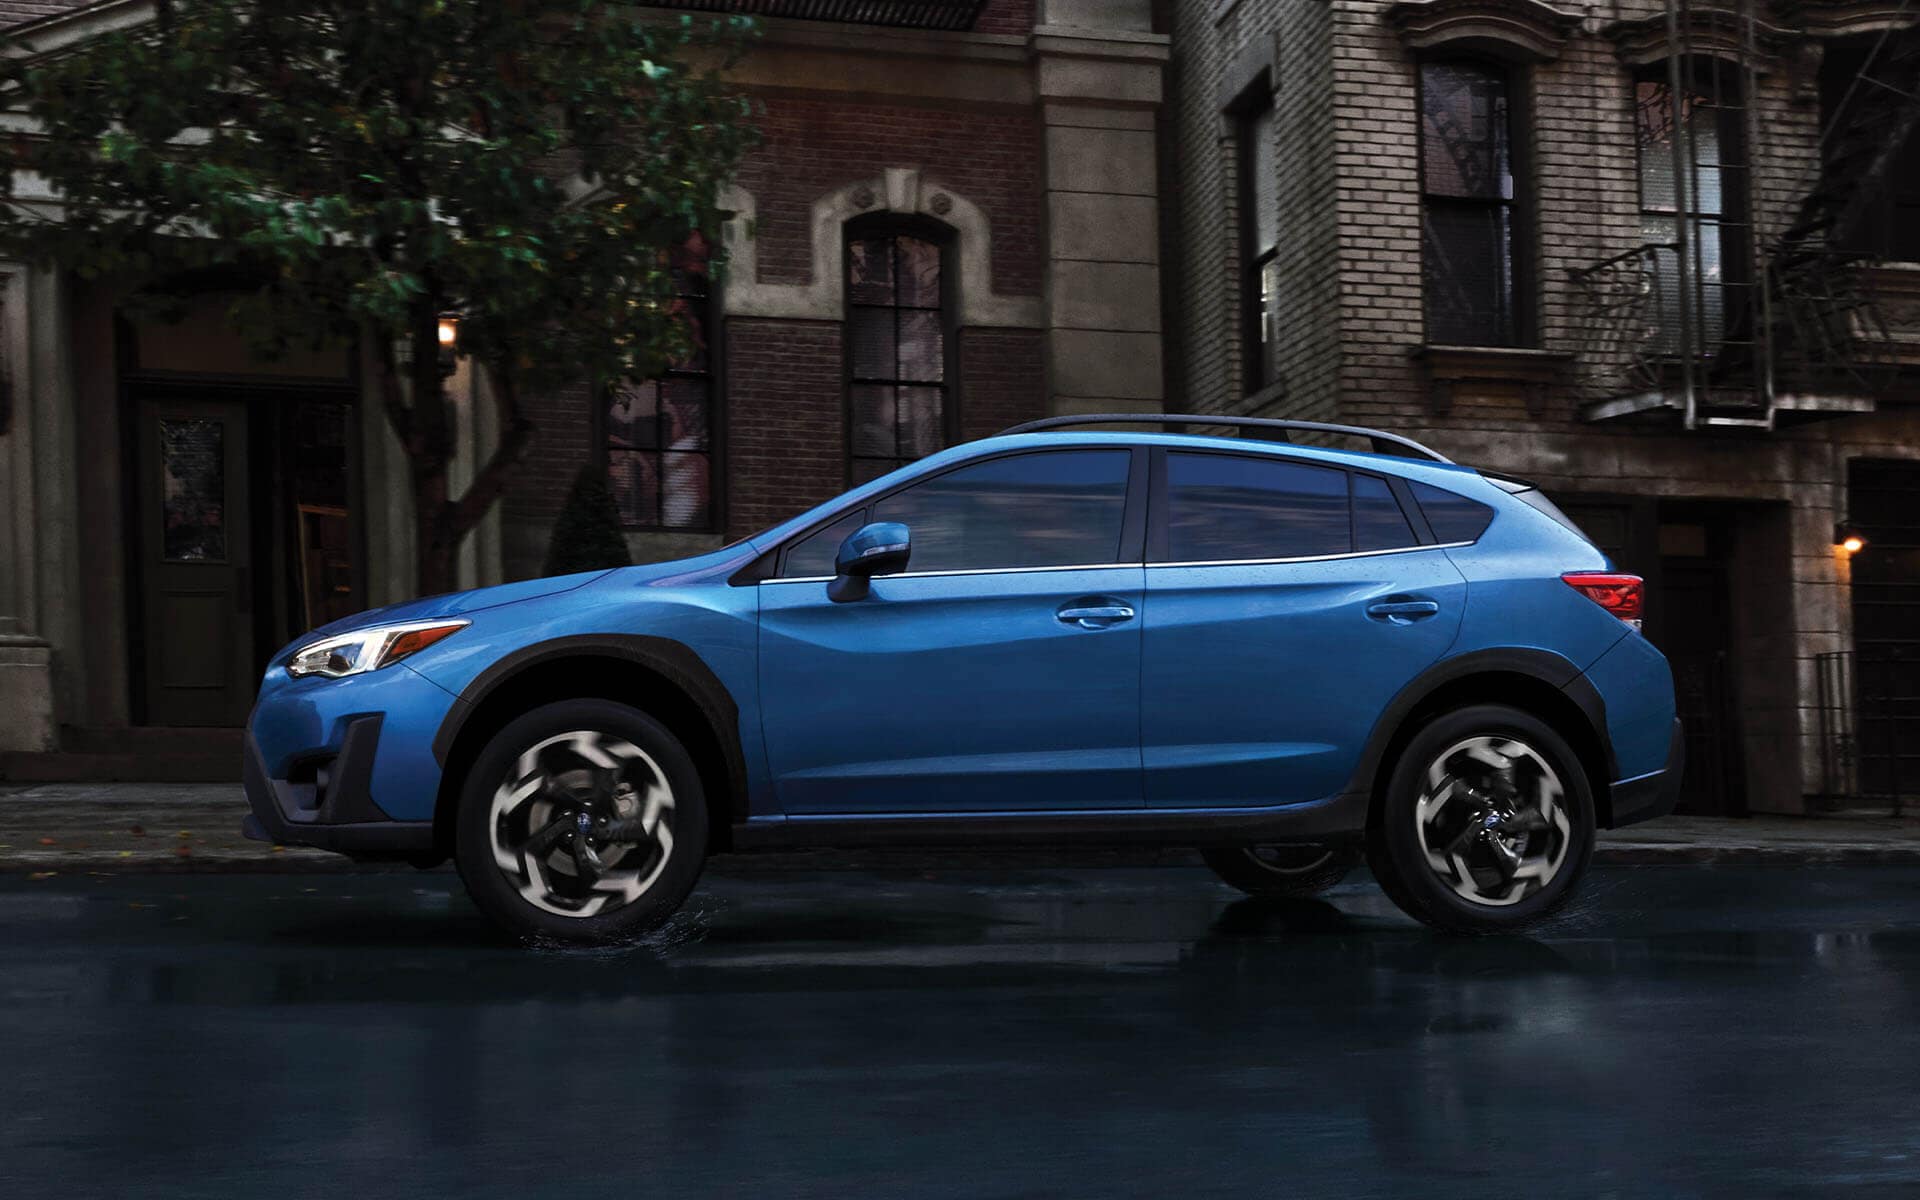 A blue Subaru Crosstrek parked on a city street in front of a brick building